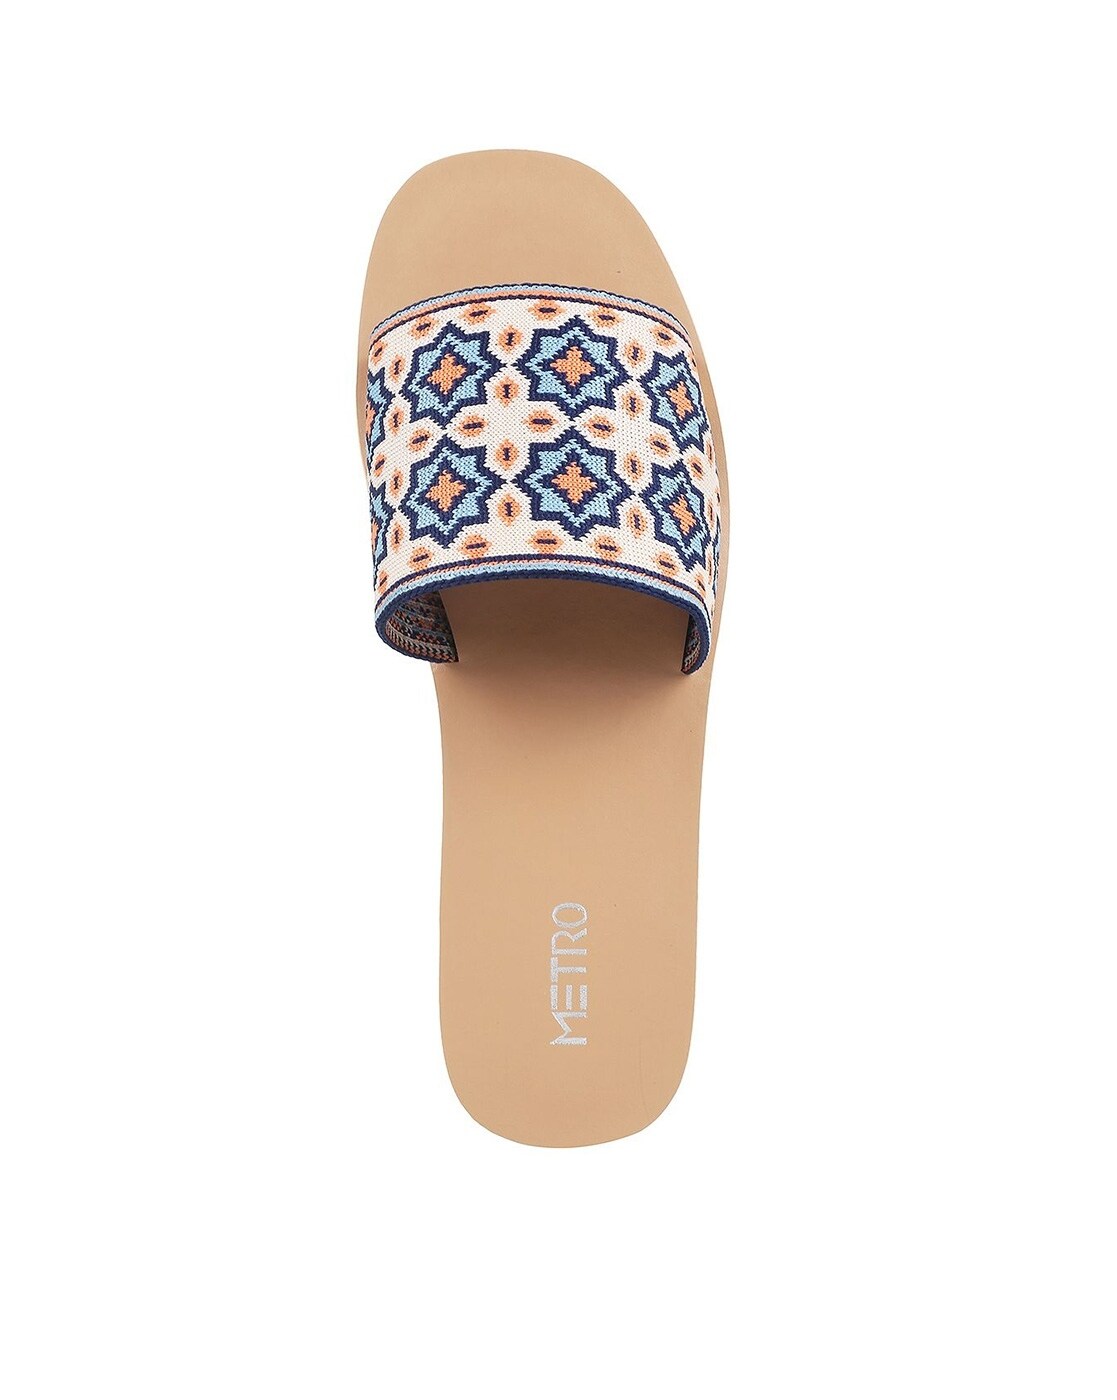 Metro Women Peech Synthetic Sandals (31-3234-80-36) (Size 3 UK/India  (36EU)): Buy Online at Low Prices in India - Amazon.in